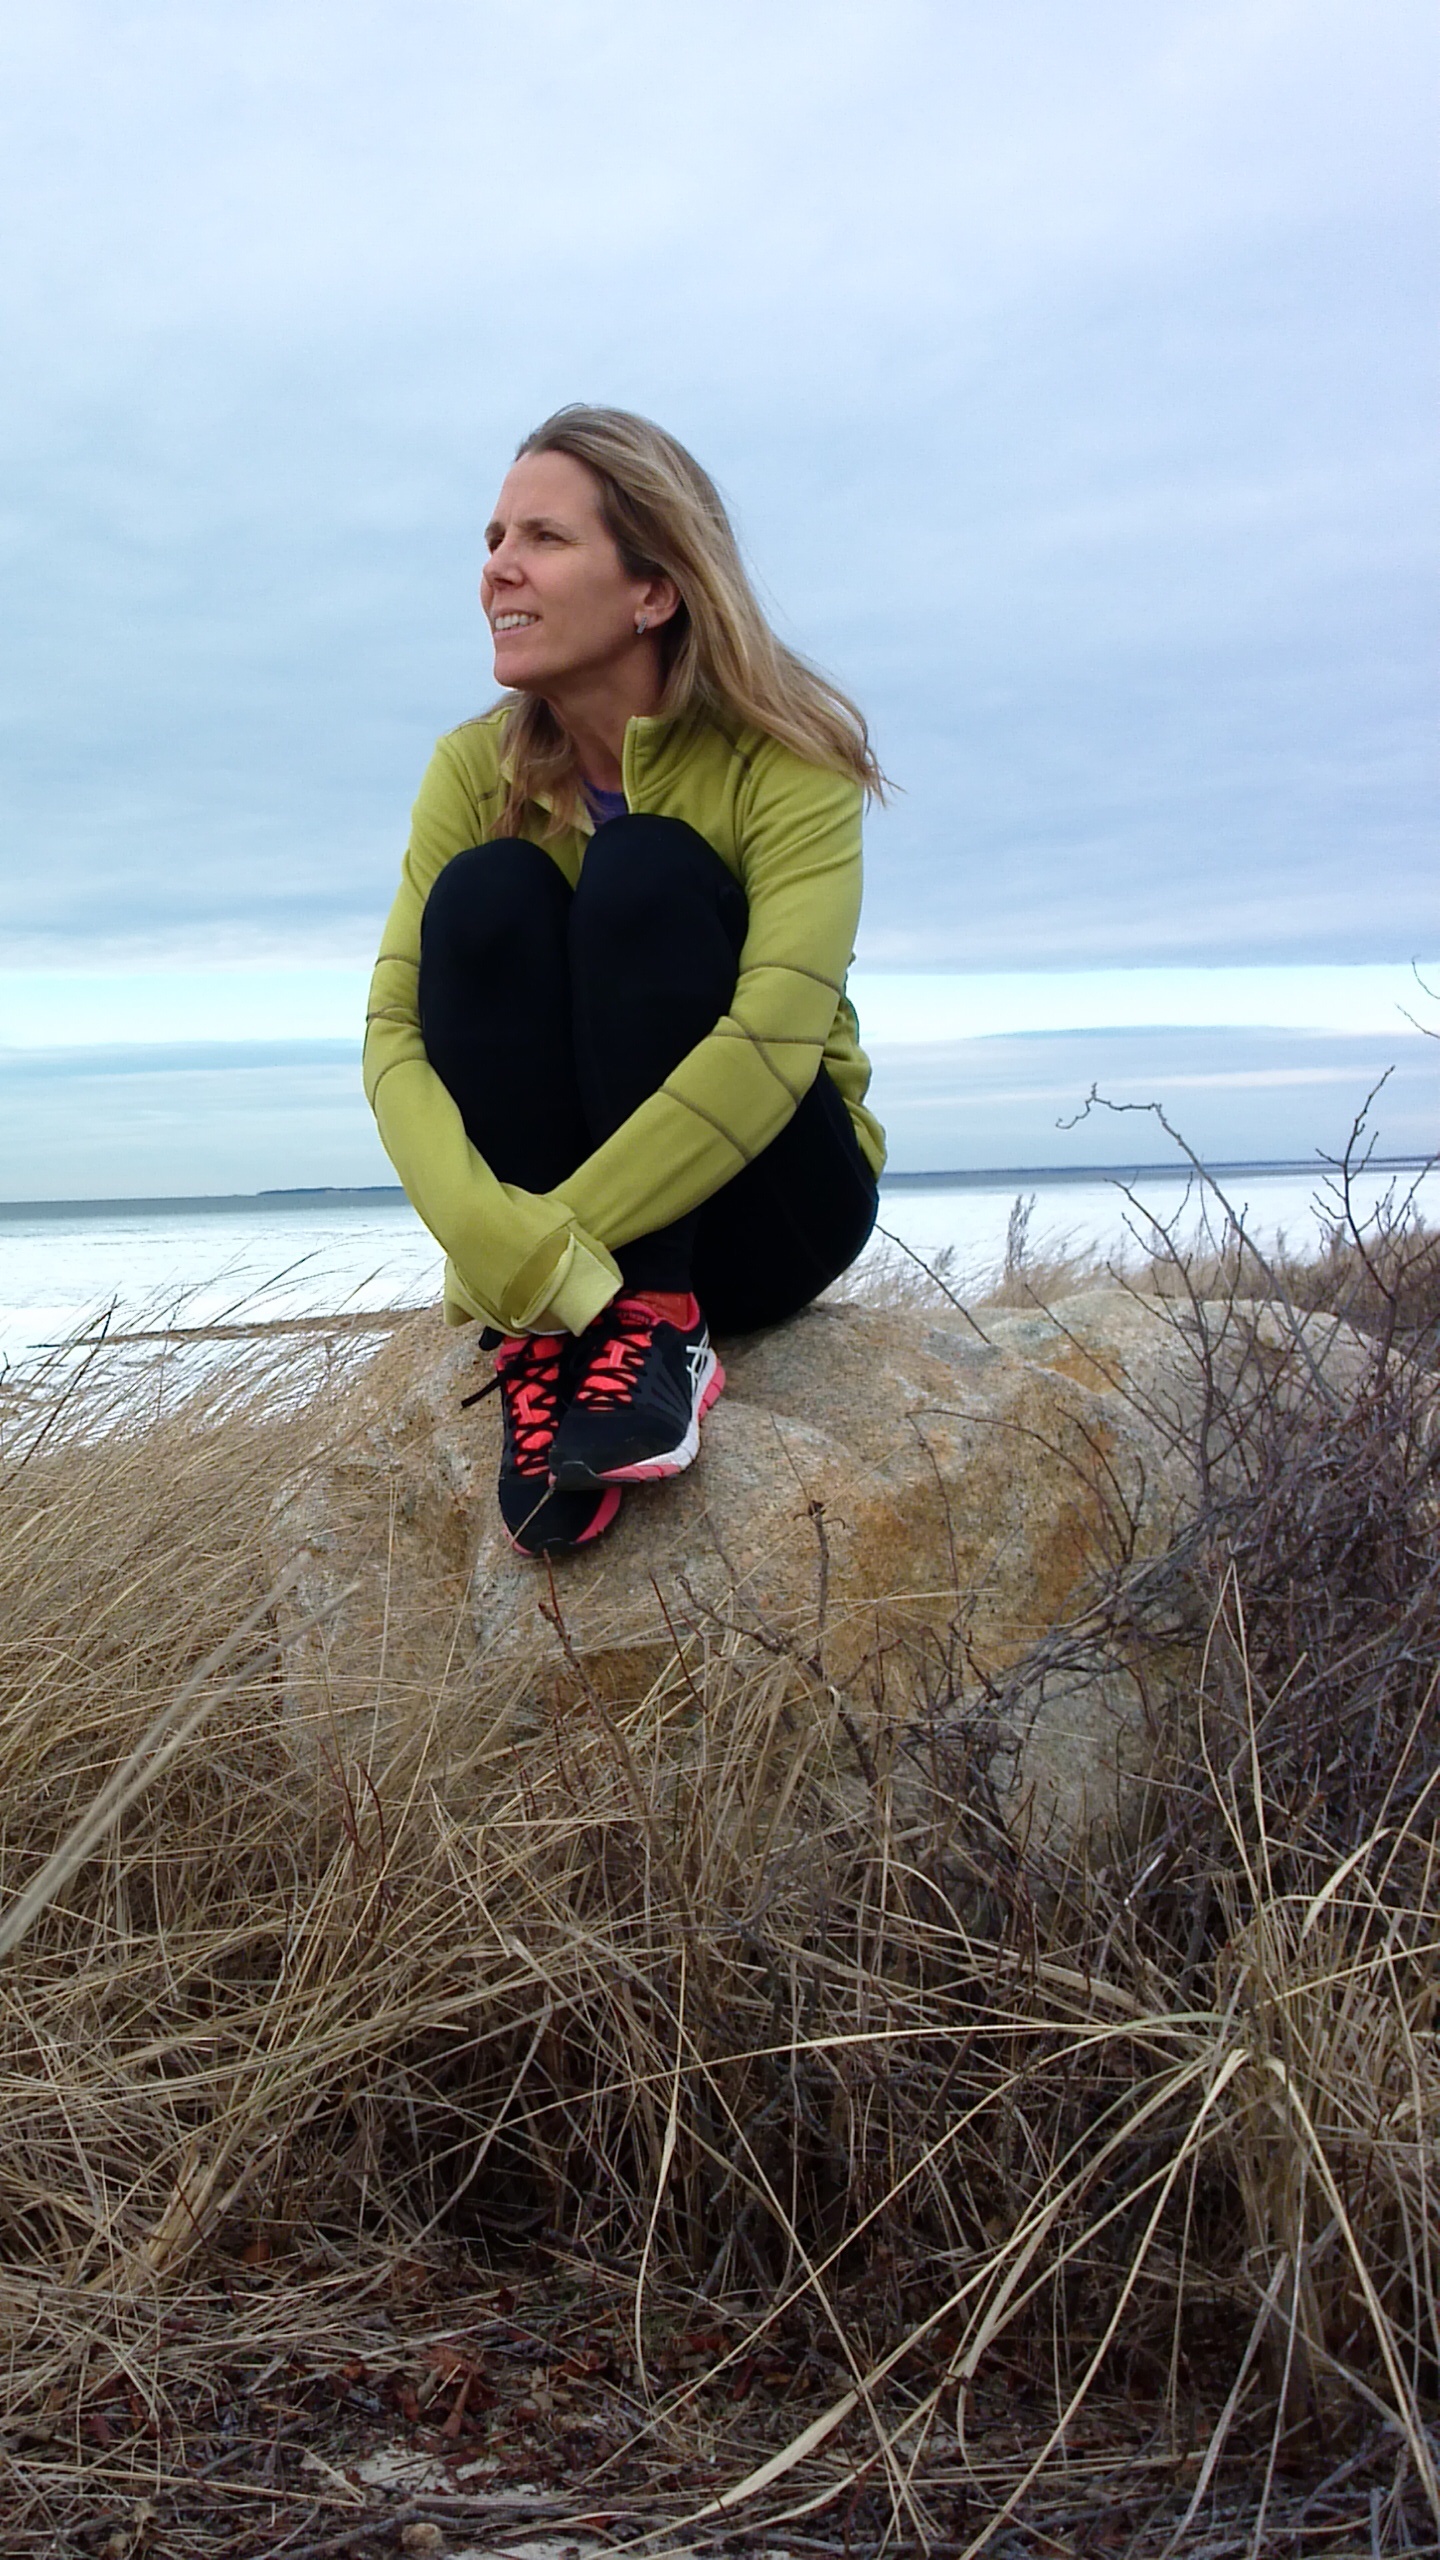 Woman sitting on rock at the beach with long sleeve shirt and pants on, pulling her legs towards her chest and looking off into the distance